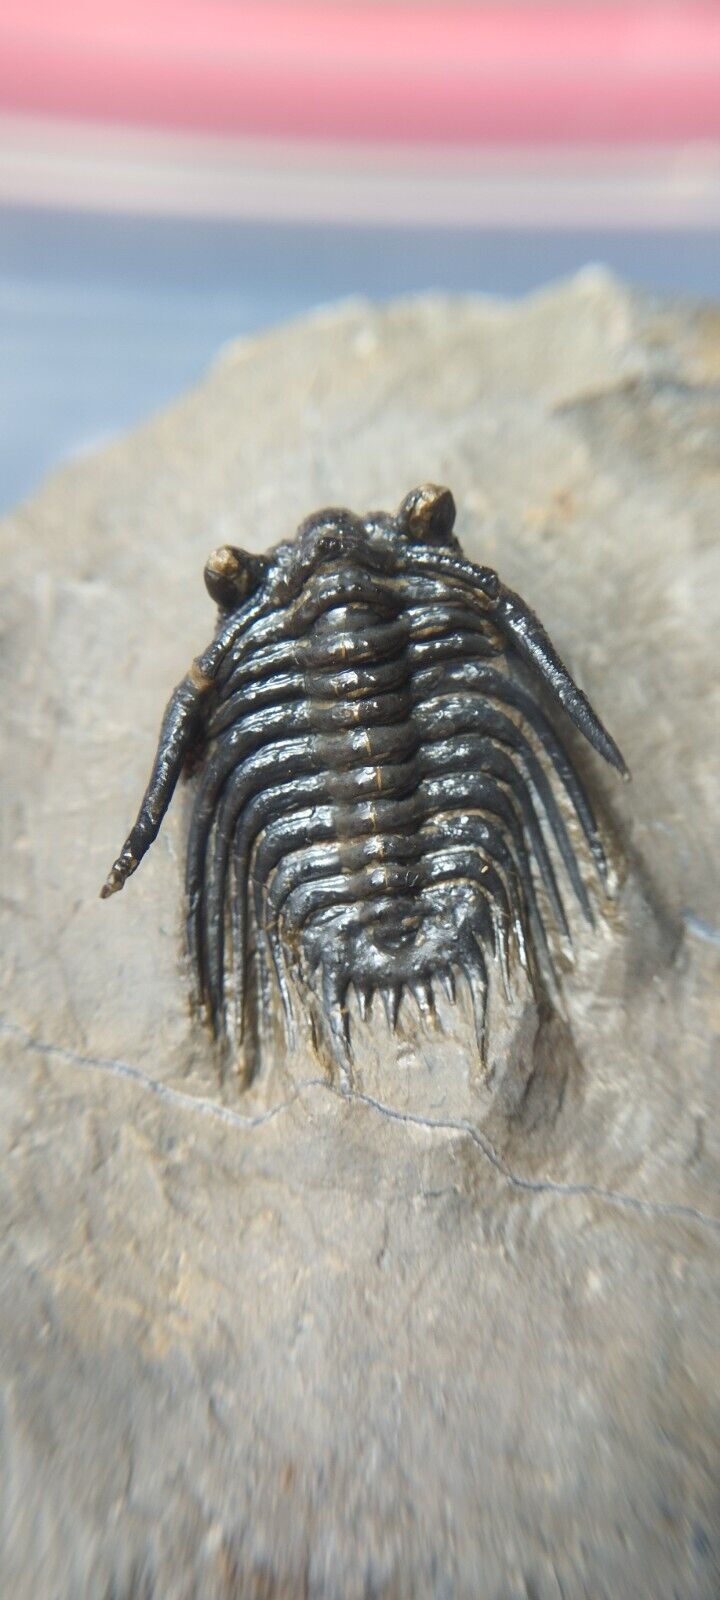 1inch Leonaspis Trilobite fossil From the Devonian of Morocco